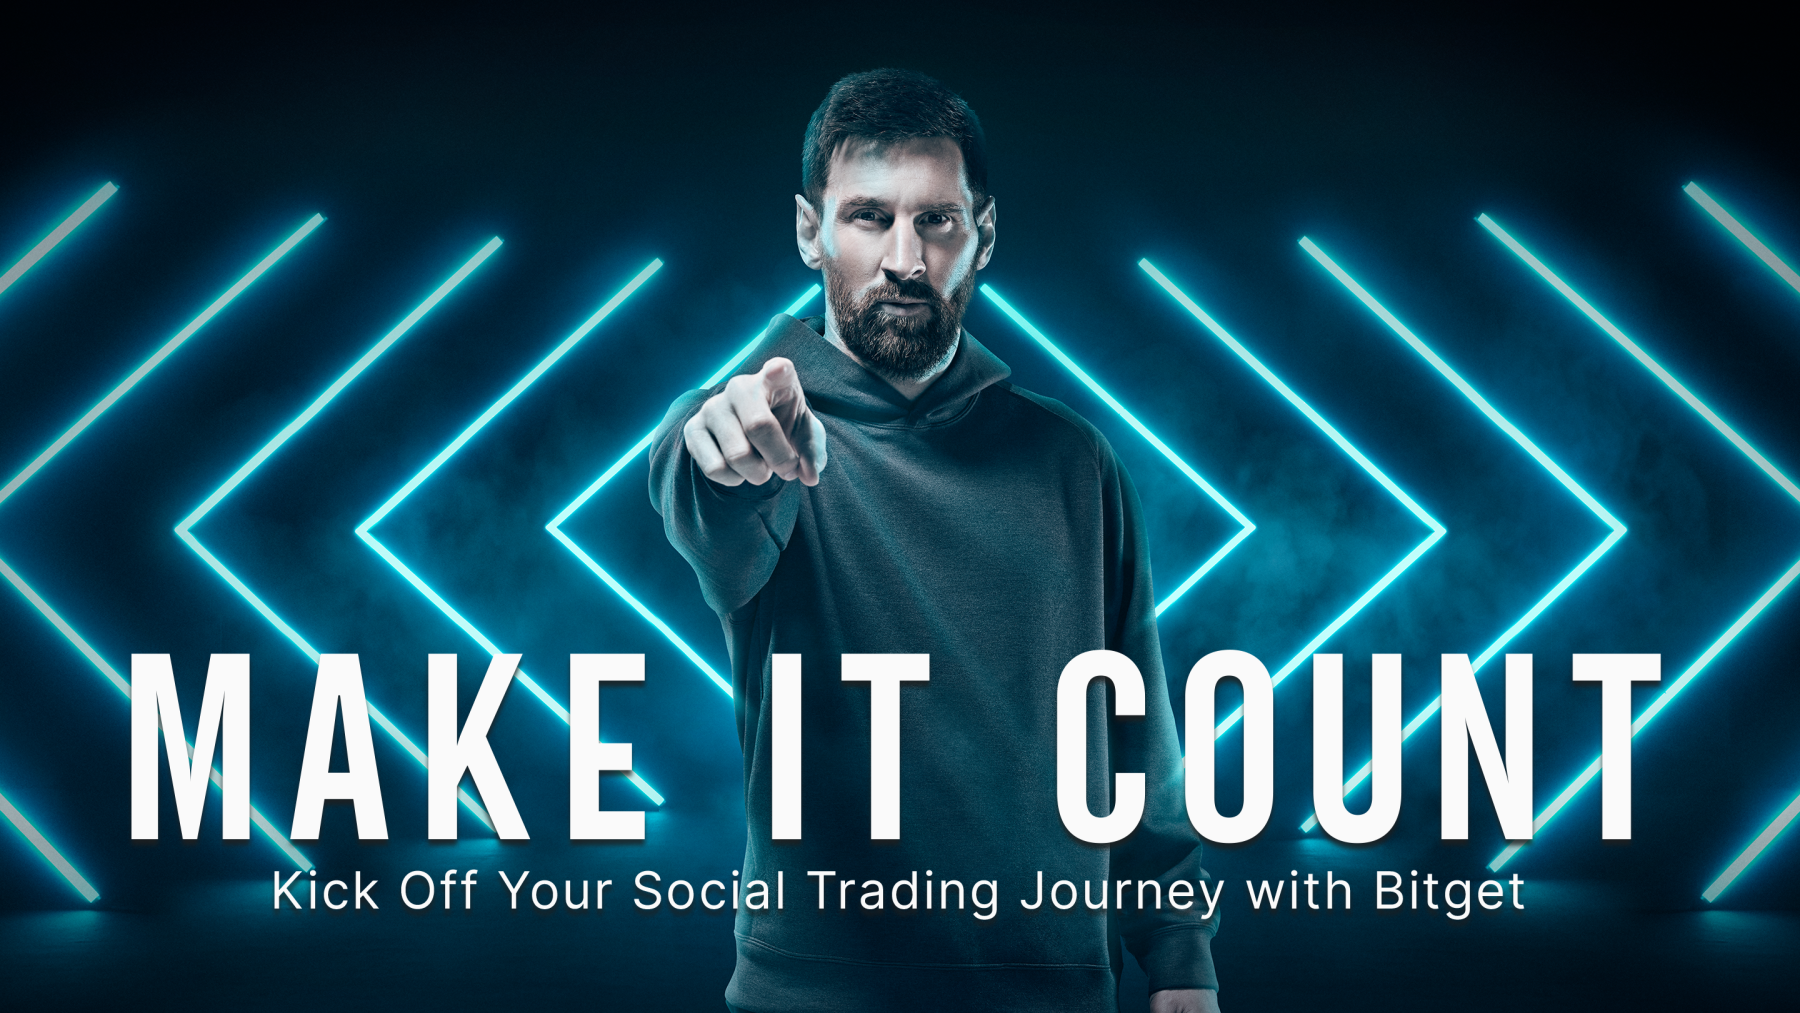 Bitget launches major campaign with Messi to revive confidence in the crypto market
